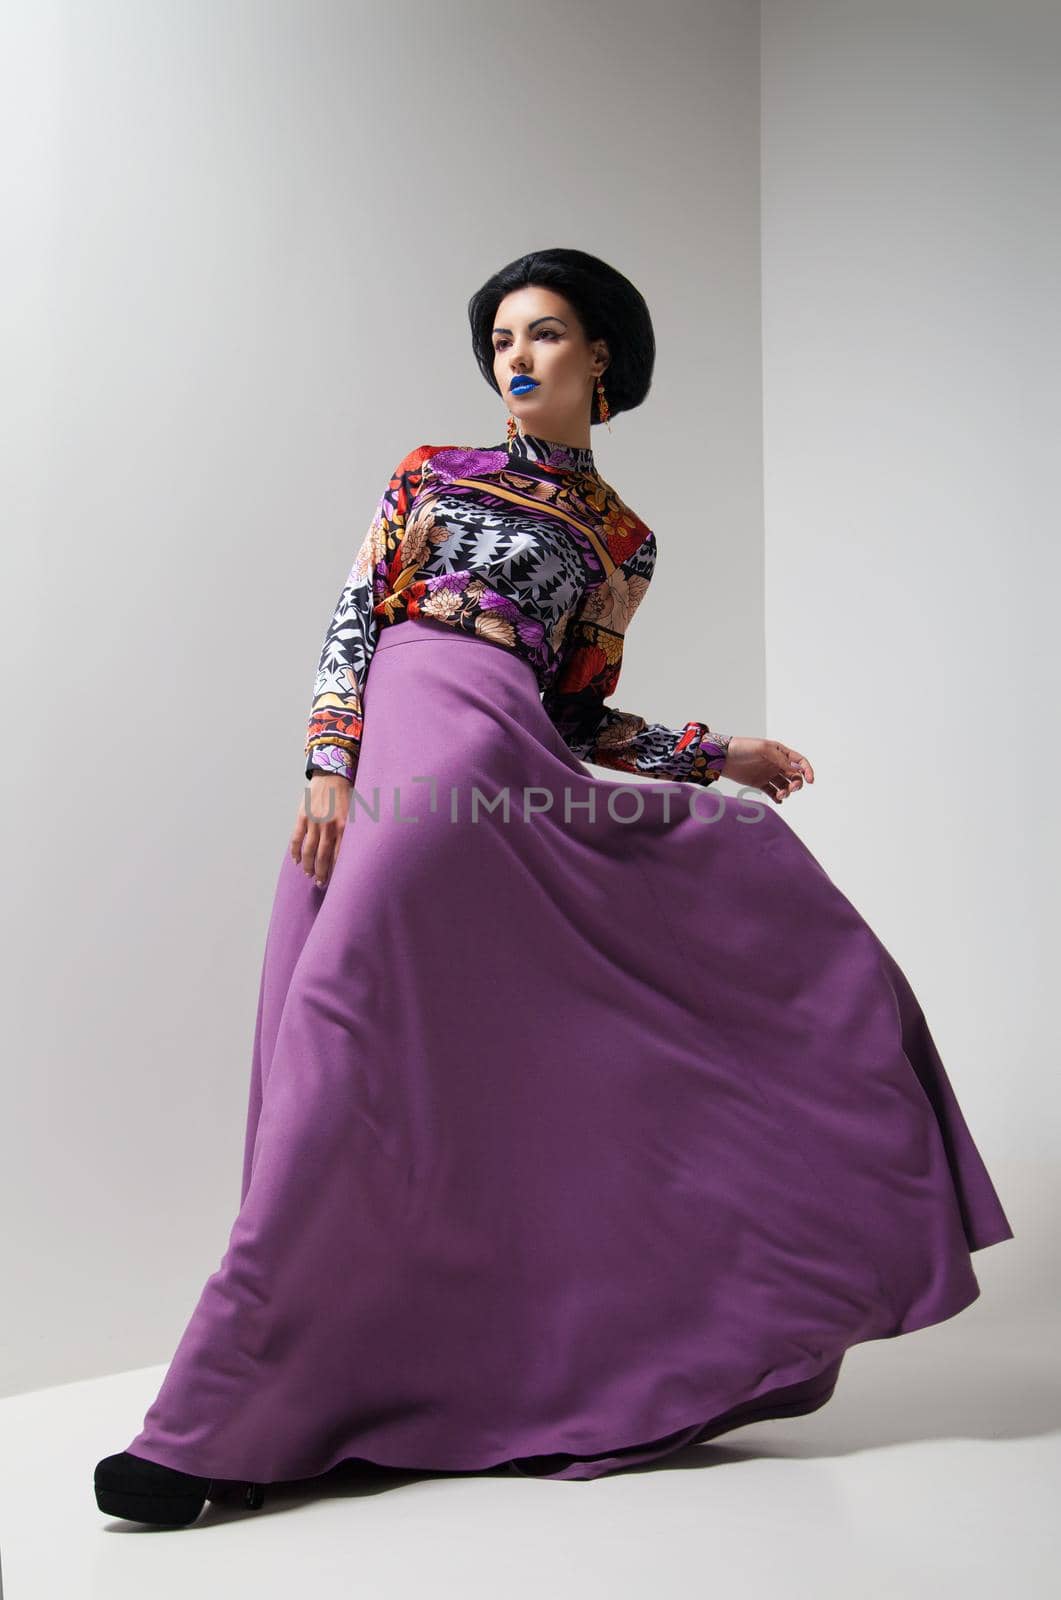 Fashion photo of young magnificent woman in purple dress. Studio photo